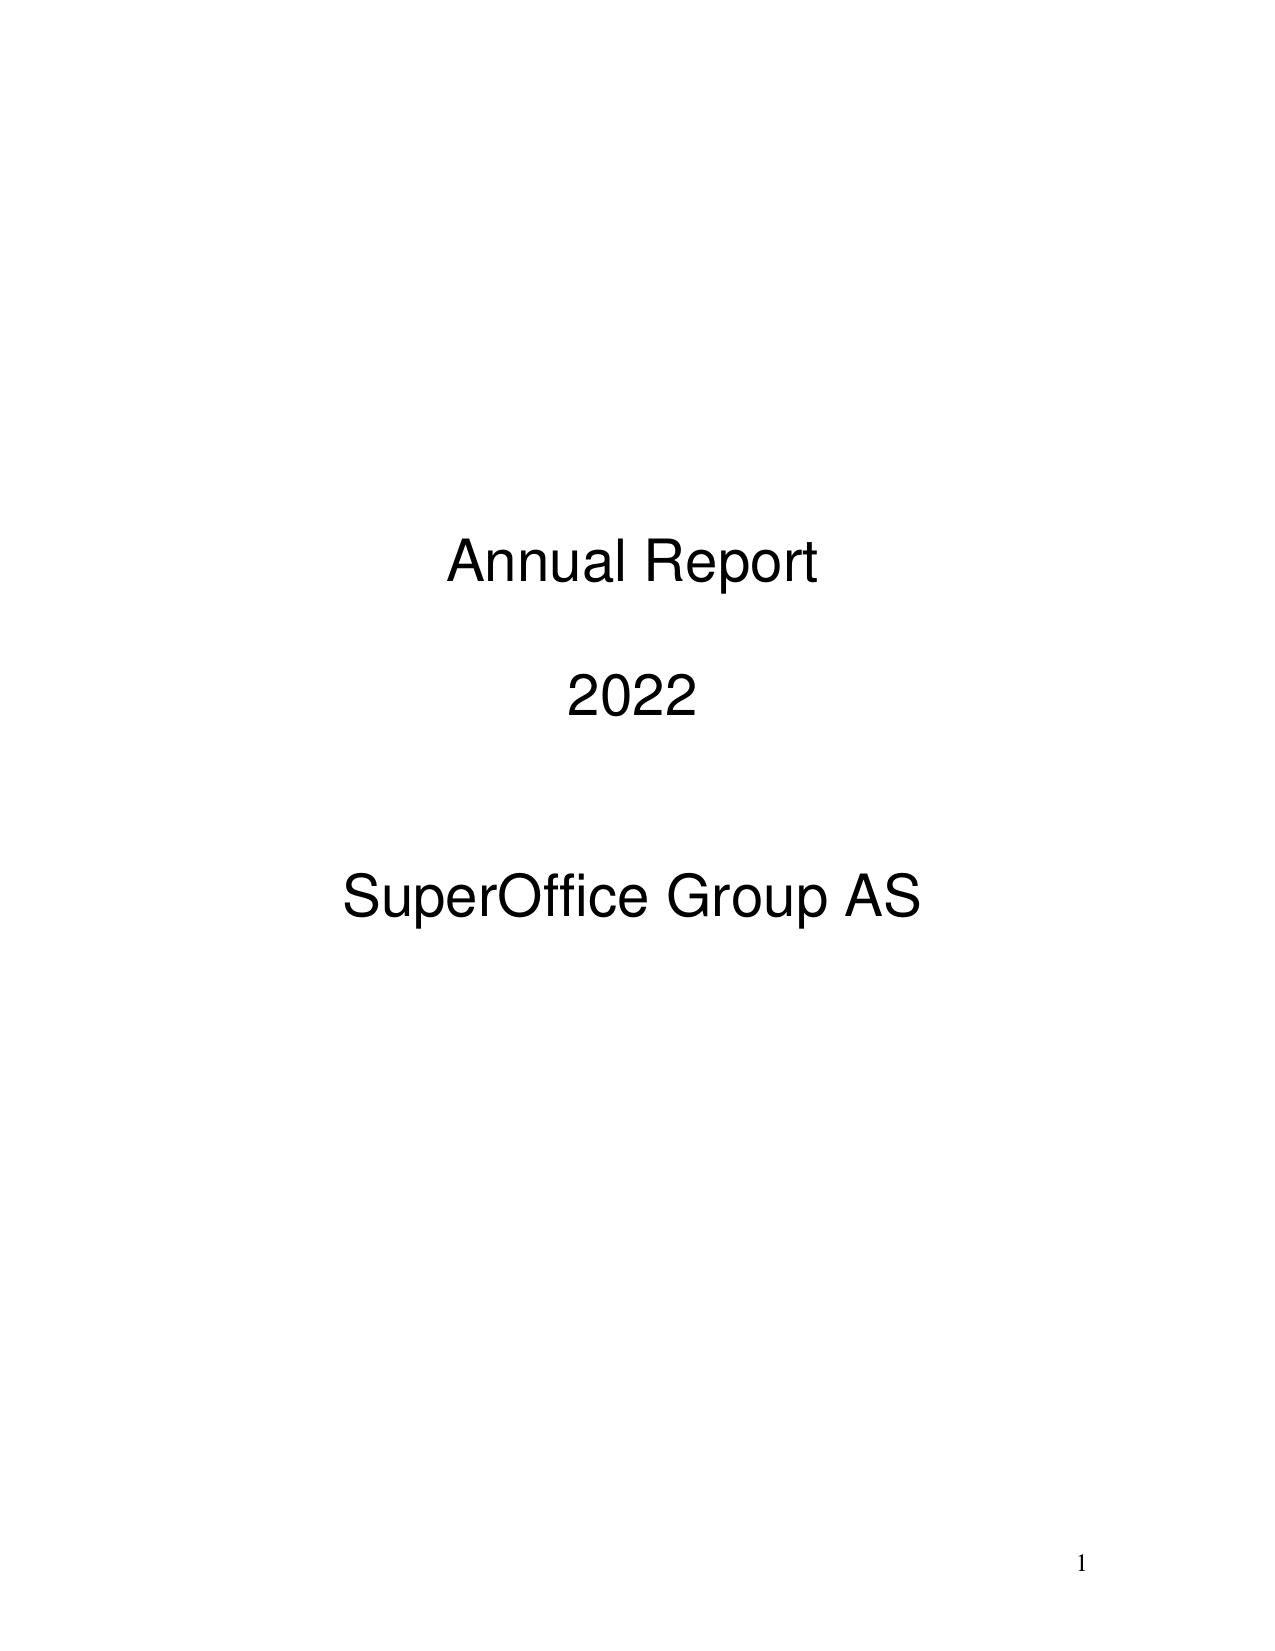 ANIKOP 2022 Annual Report